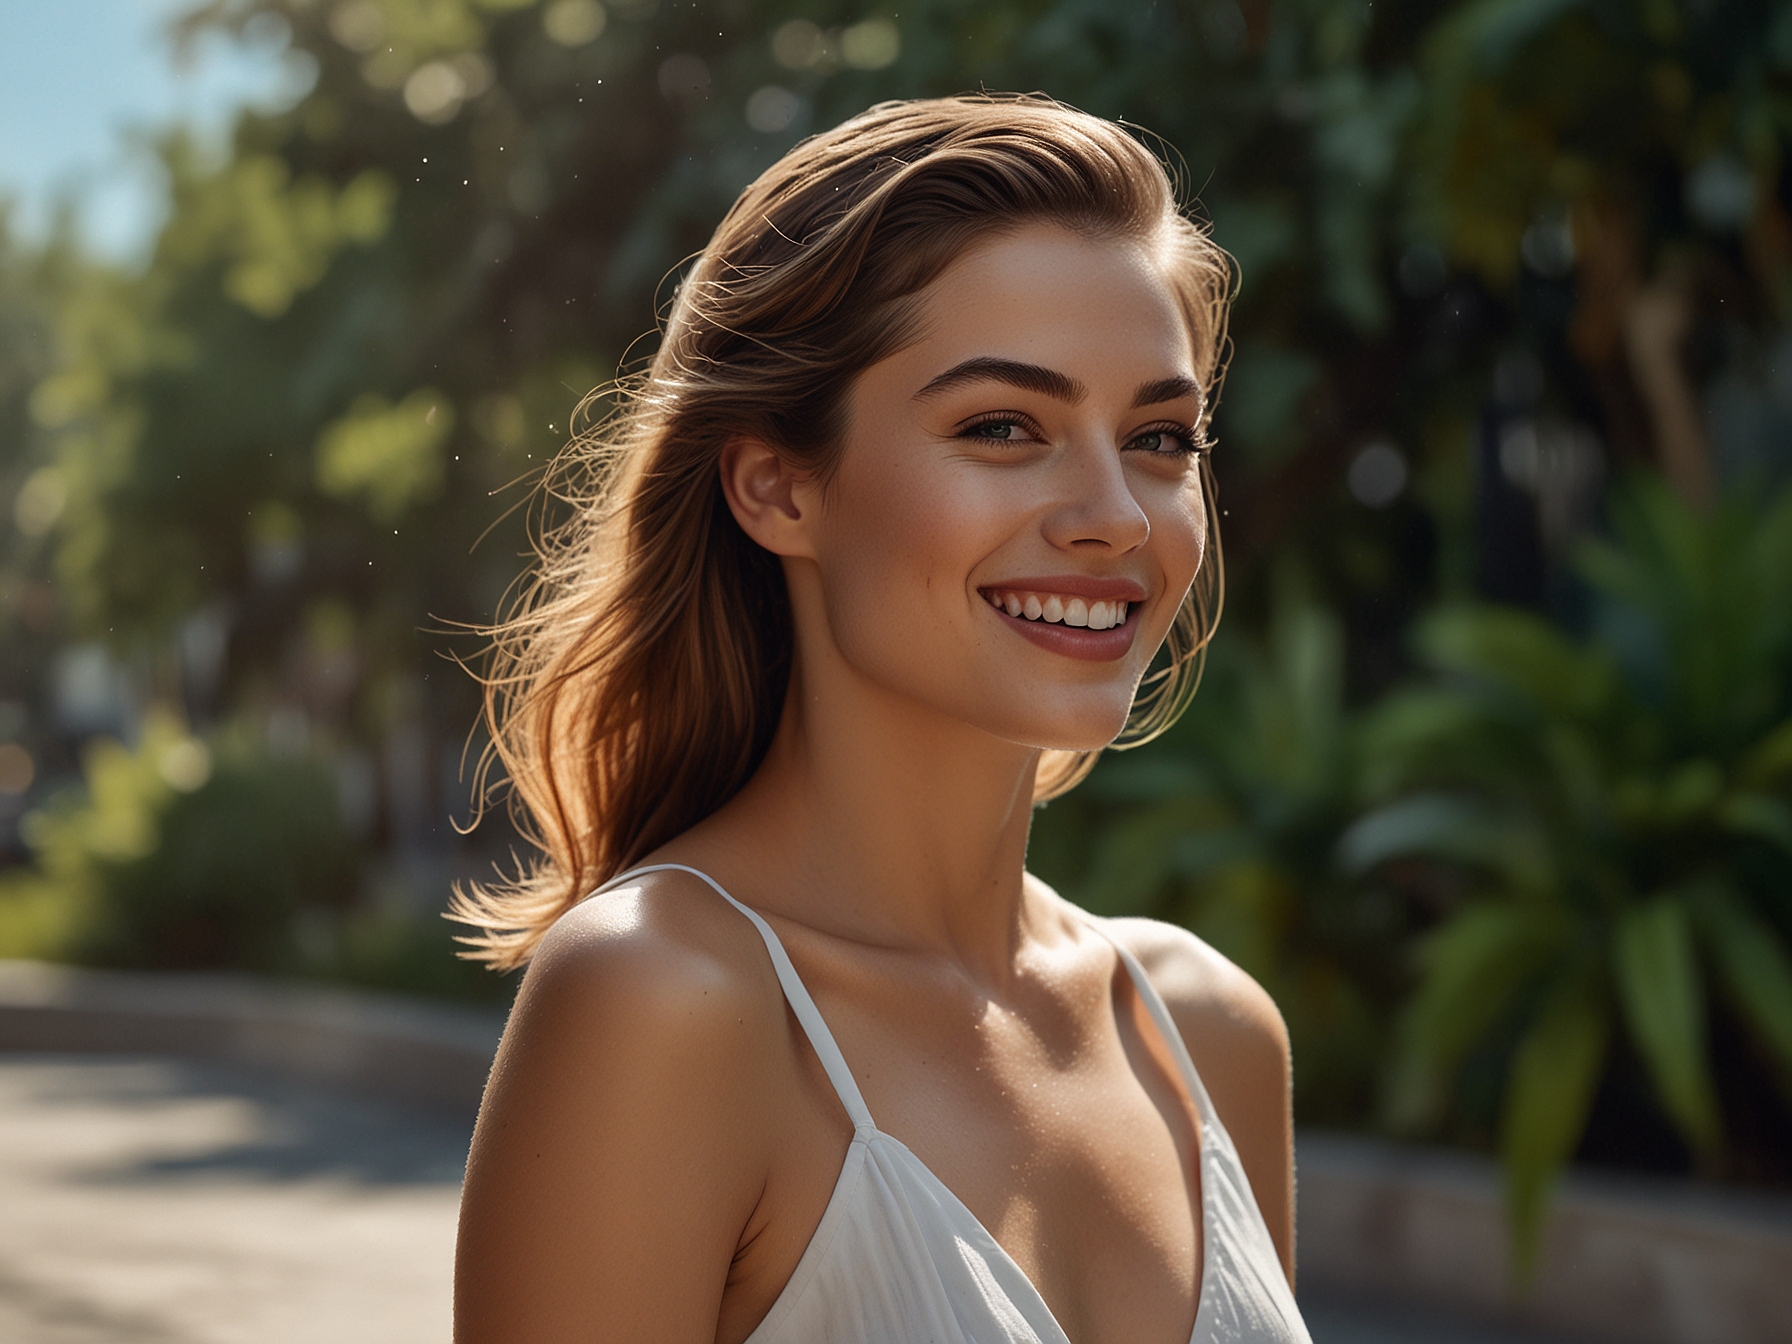 A model with perfect, sleek hair smiles confidently in a humid outdoor setting, showcasing the effectiveness of using anti-humidity hairspray for maintaining stylish hairstyles despite the weather.